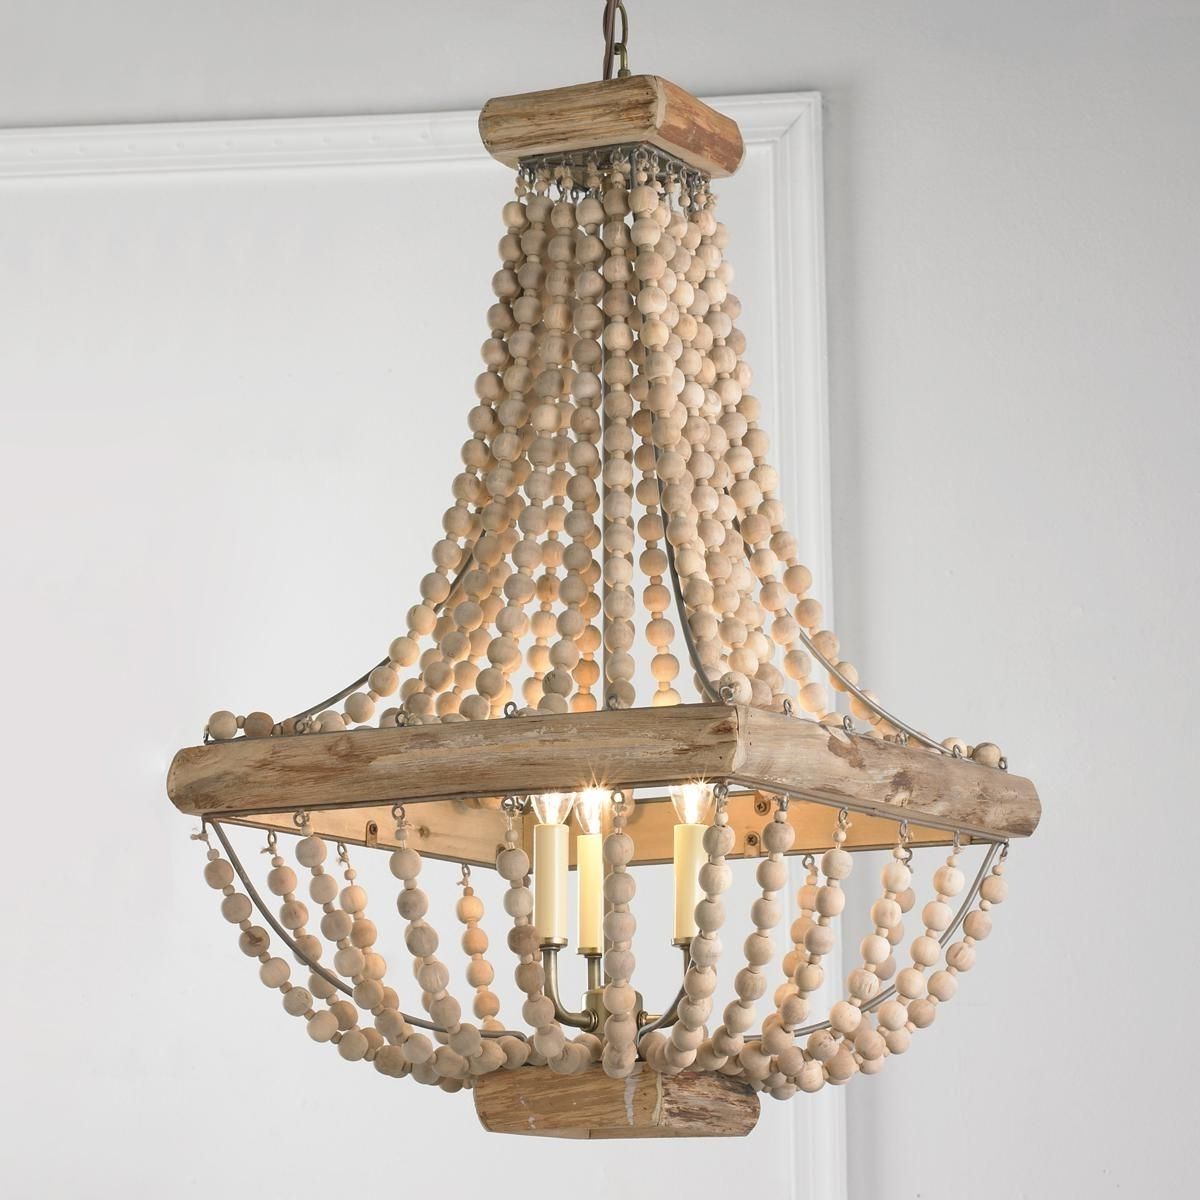 Fashionable Turquoise Wood Bead Chandeliers Intended For Wood Bead Chandelier From Romantic Bedrooms To Garden Solarium (View 1 of 20)